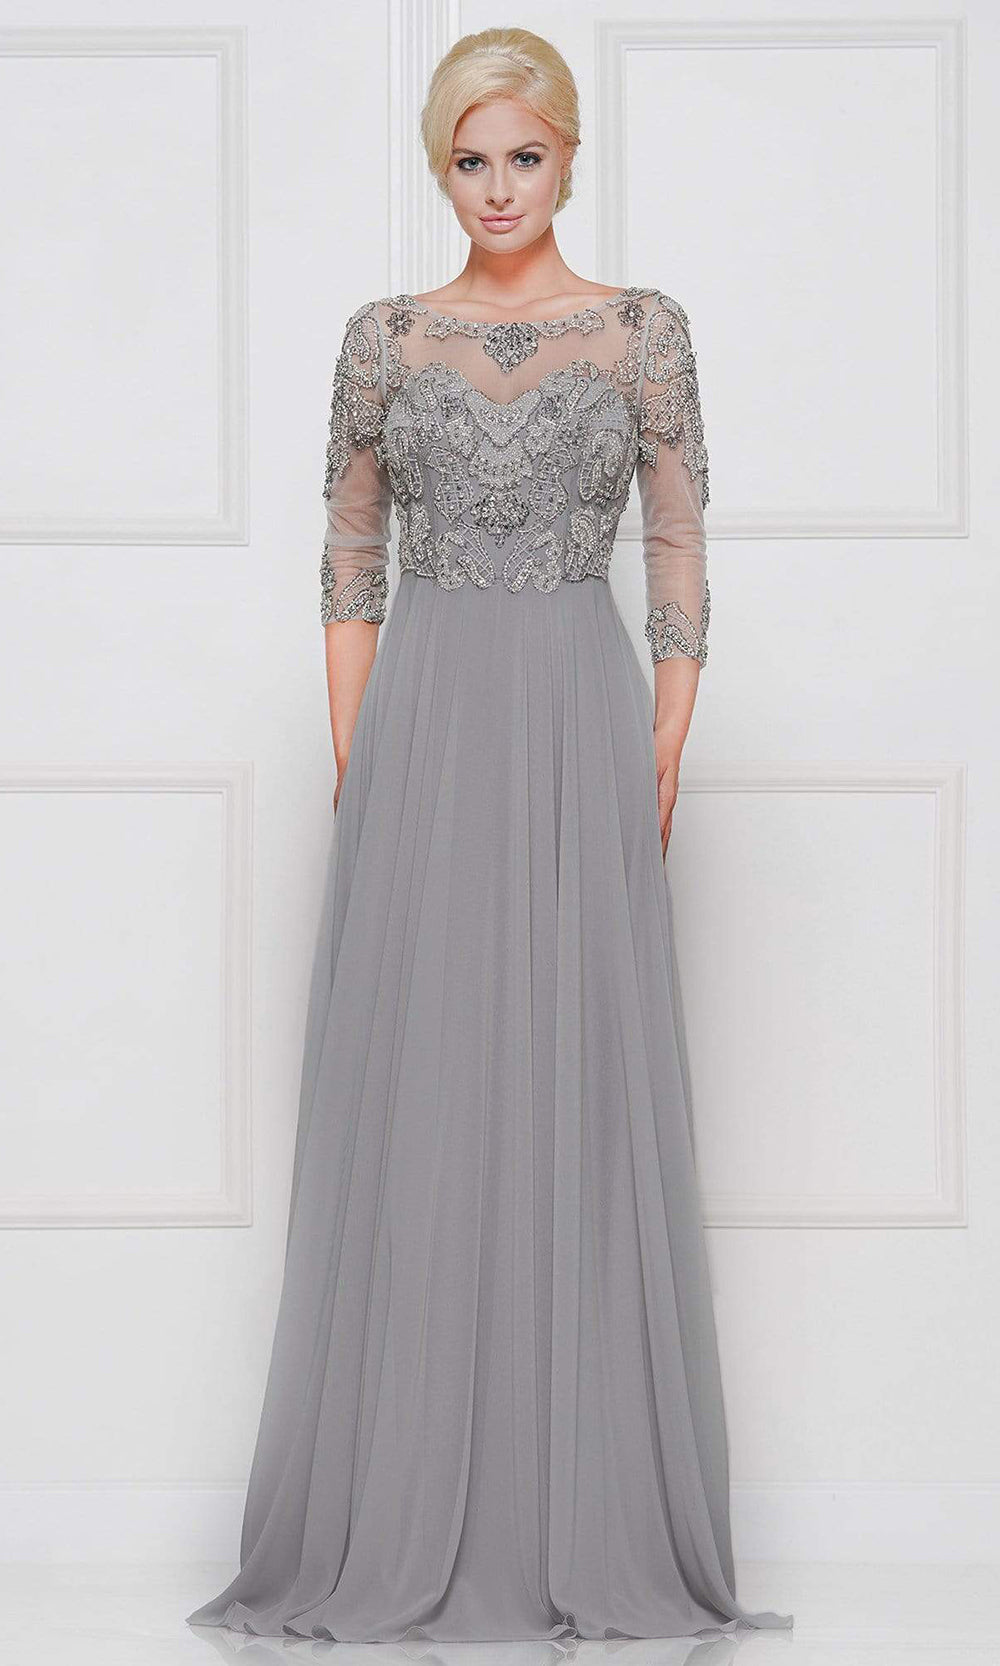 Marsoni by Colors - Quarter Sleeve Chiffon Scoop Neck Dress M189 - 1 pc Grey In Size 20 Available CCSALE 20 / Grey